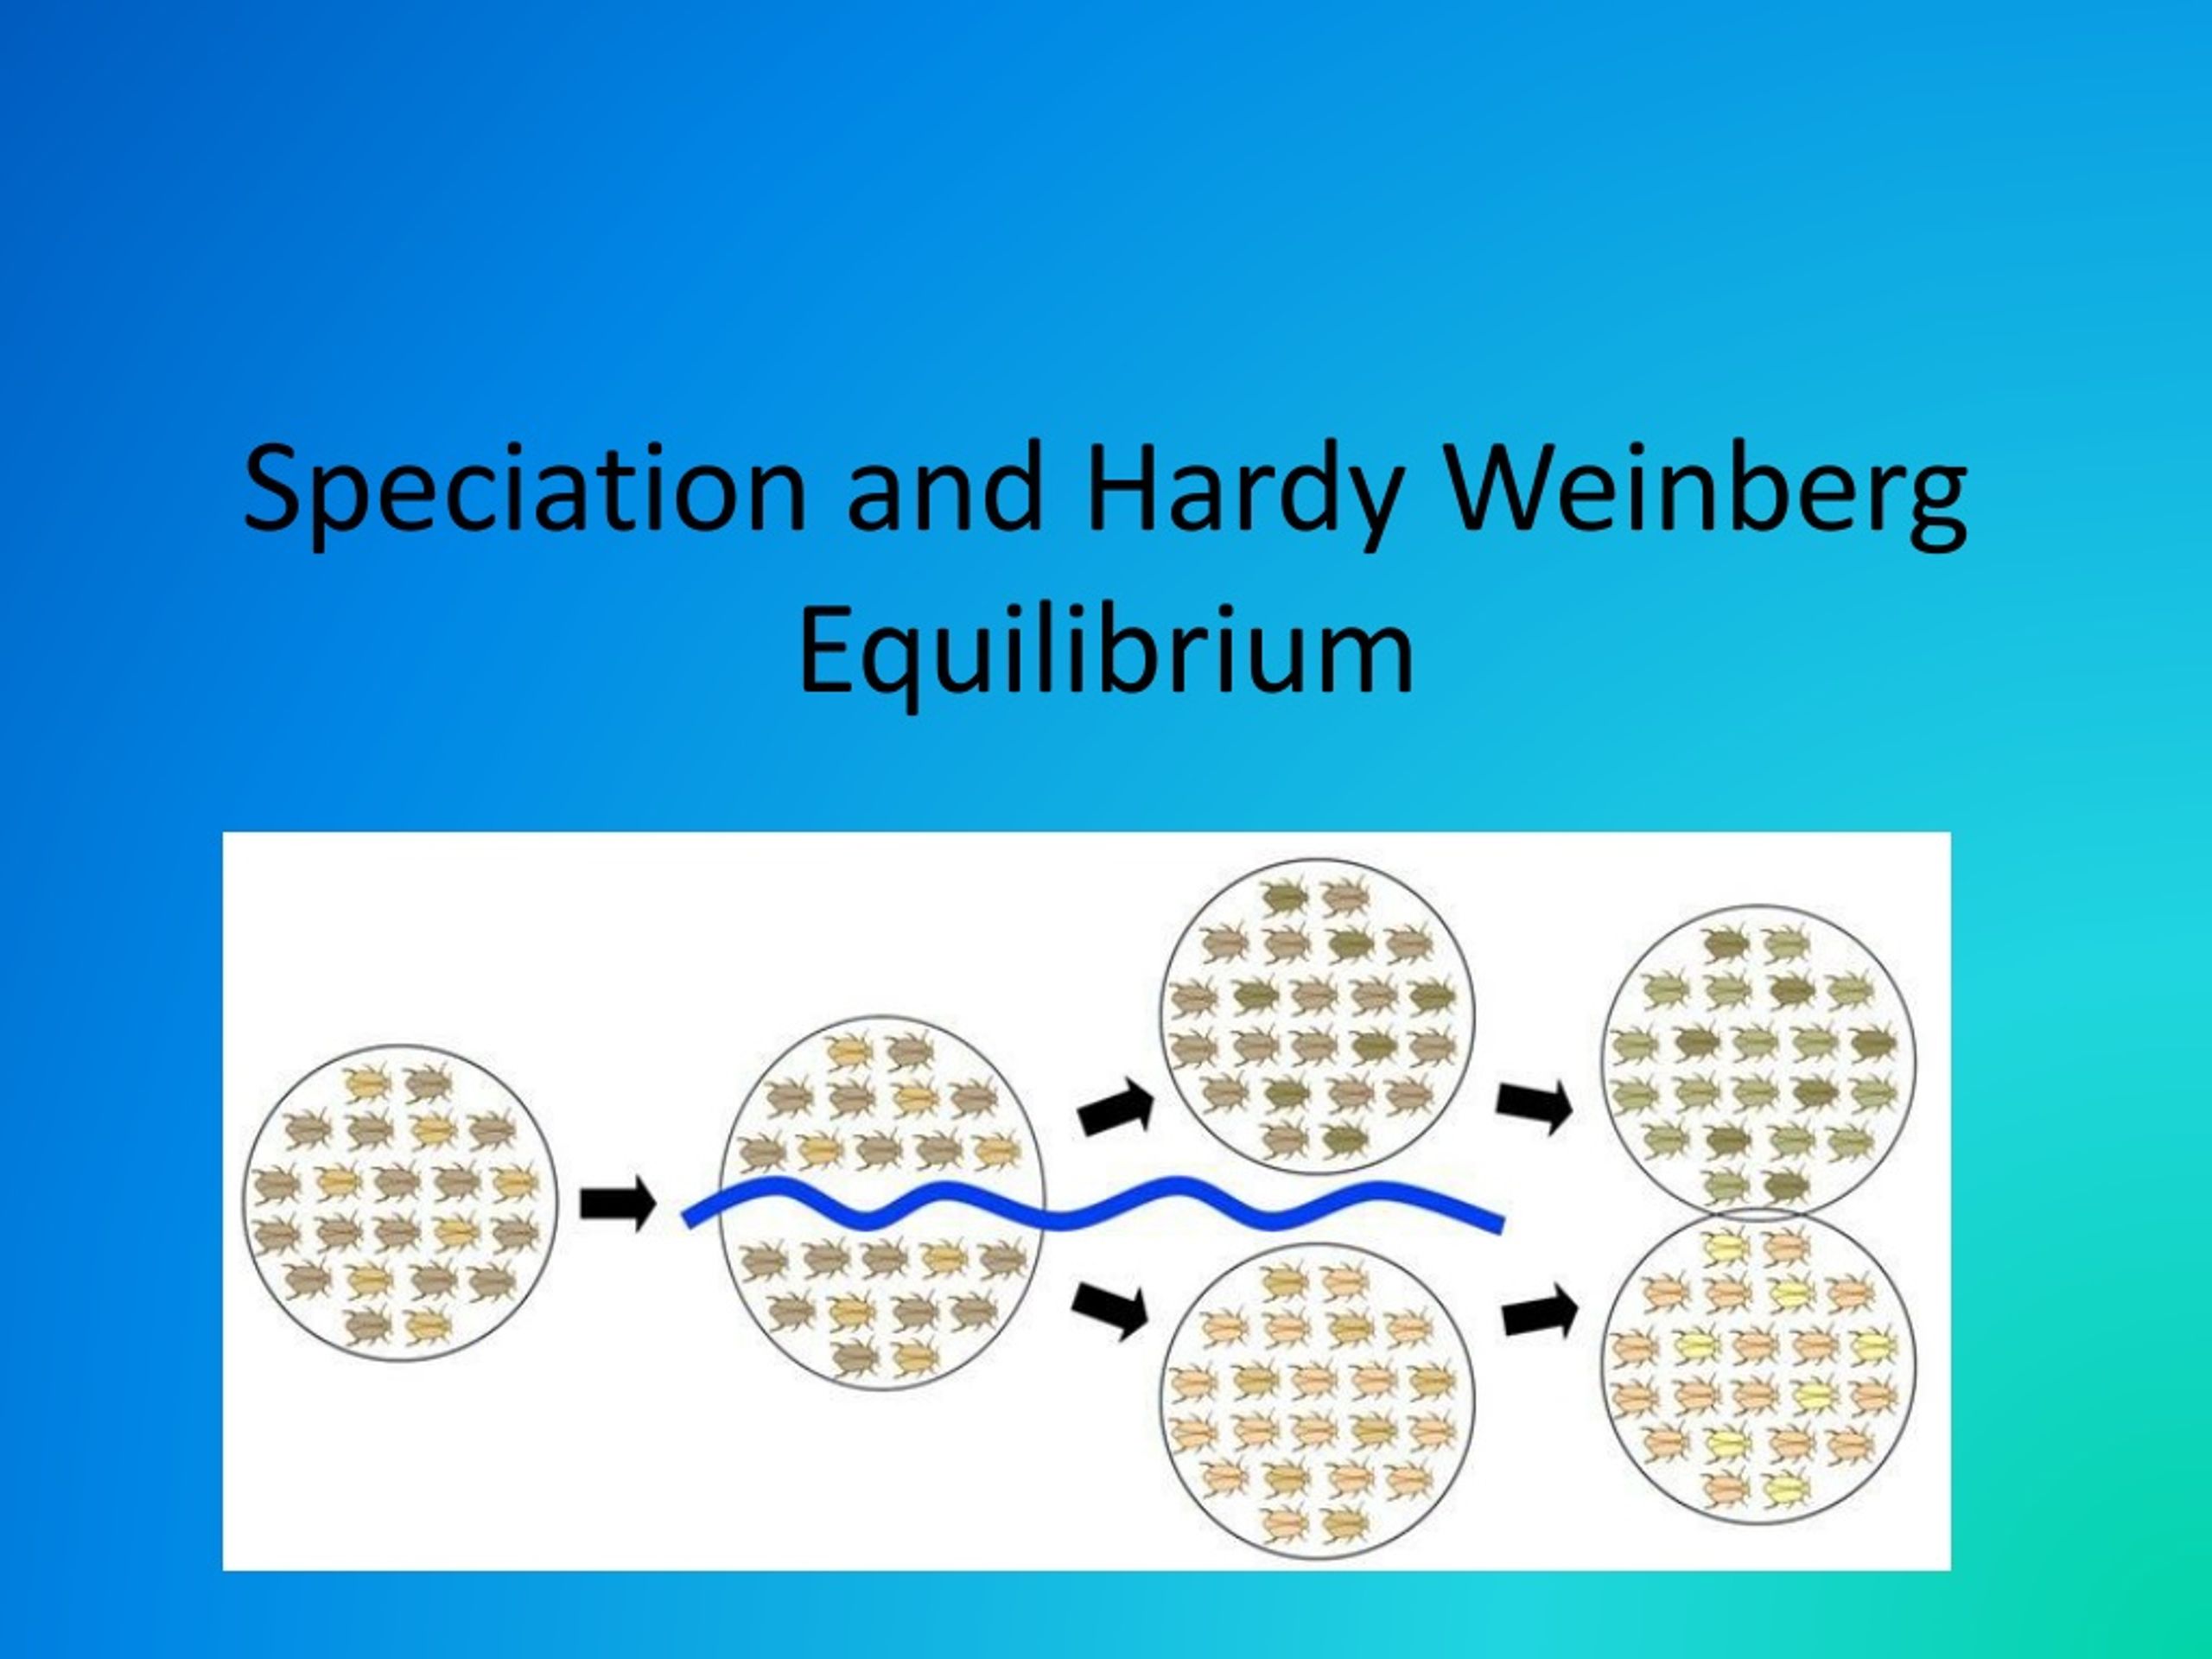 Ppt Speciation And Hardy Weinberg Equilibrium Powerpoint Presentation Id8970595 3156